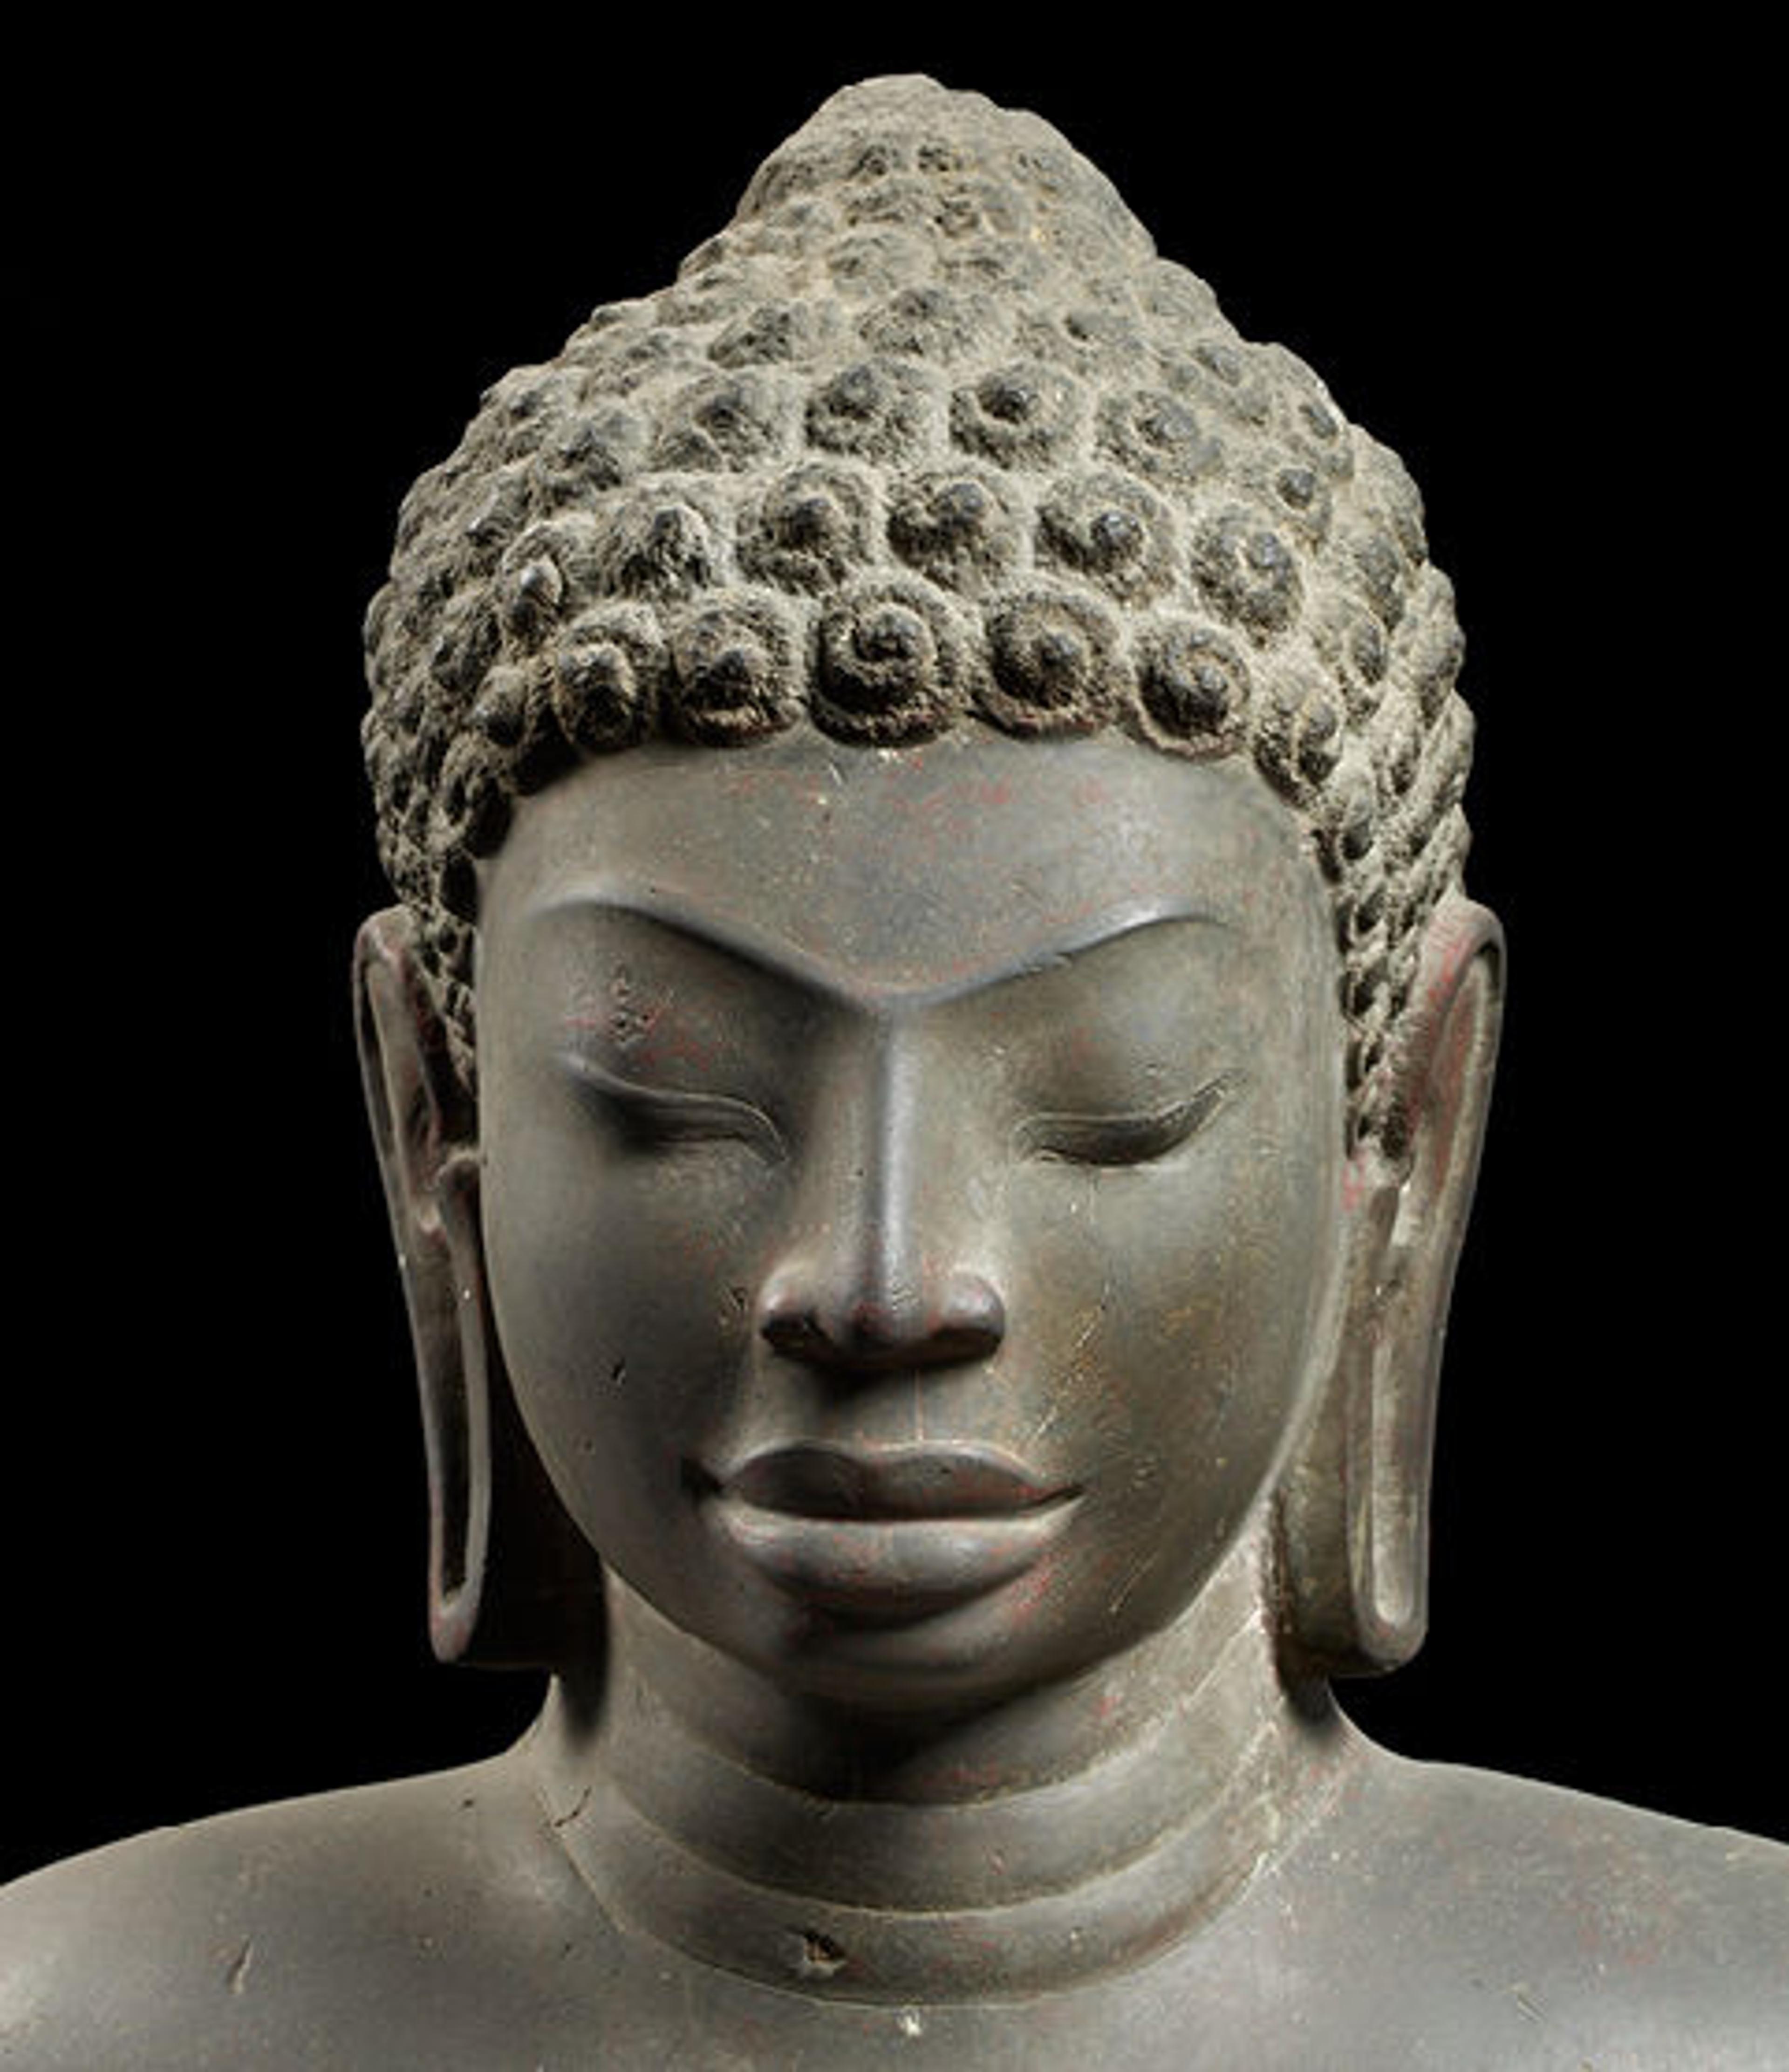 Lost Kingdoms: Hindu-Buddhist Sculpture of Early Southeast Asia, 5th to 8th Century